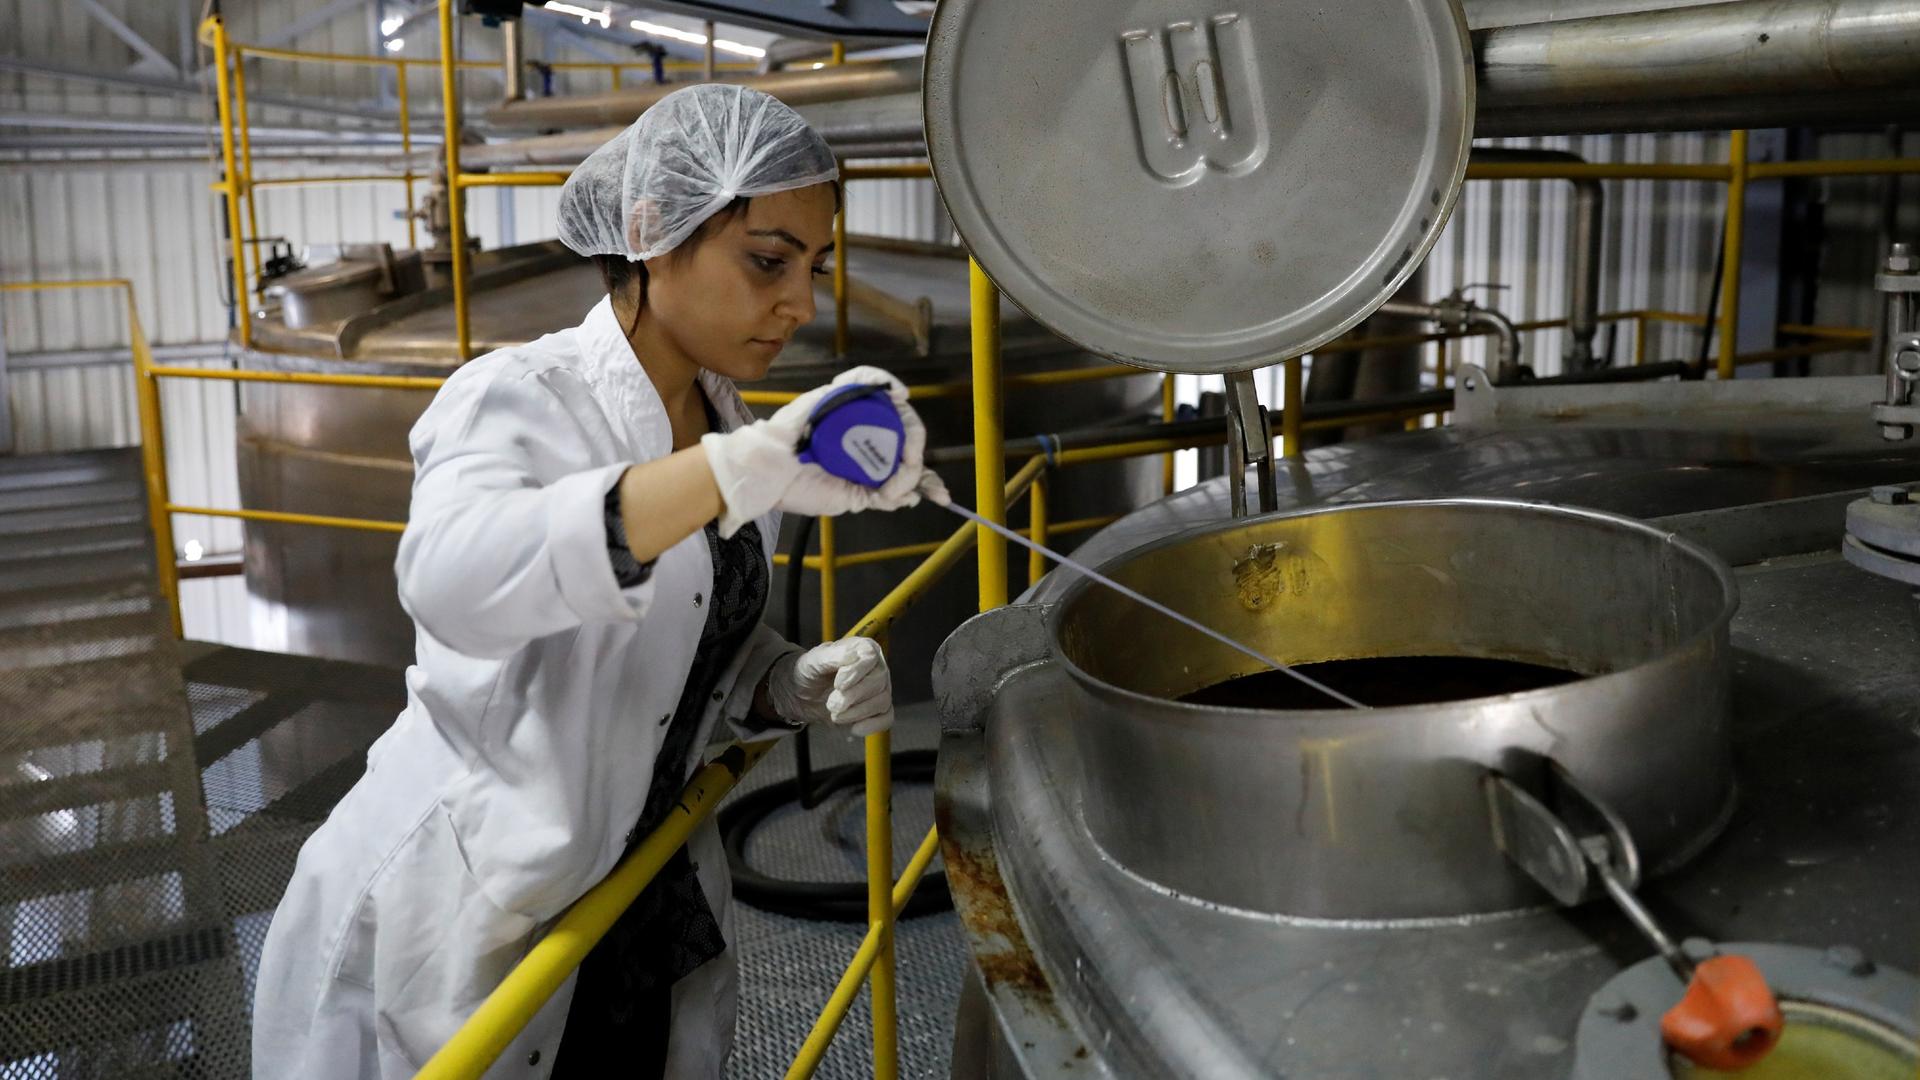 In this file photo, an employee takes a sample from a storage cylinder of Turkey's popular alcoholic drink rakı at the Infotex Alkollu Icecekler plant in the town of Dinar, Turkey, Nov. 30, 2017.